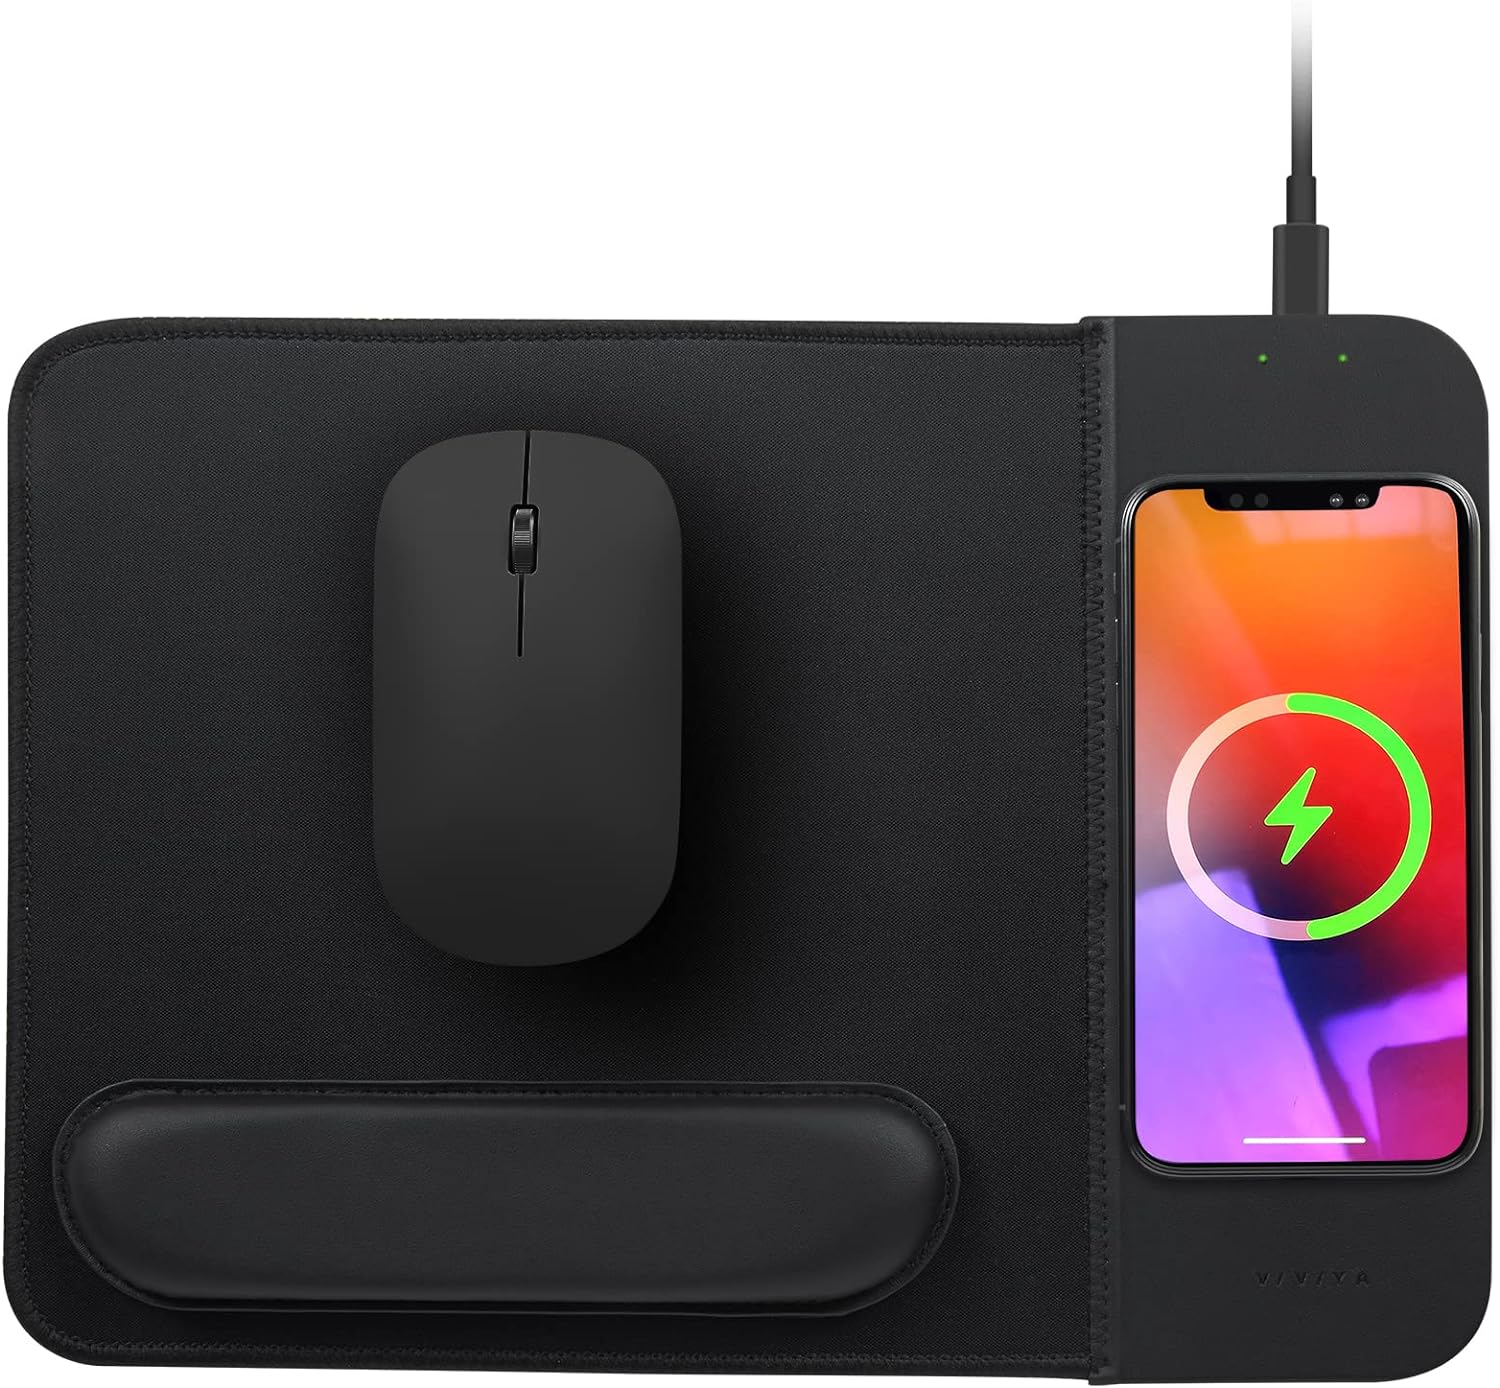 15W Wireless Charging Mouse Pad with Wrist Support, Fast Qi Wireless Charger Mouse Mat for iPhone 14/13/12/12 Pro/11/11Pro/XR/Xs/X/8, Samsung Galaxy S10/S9/S8 Plus Note 9/8 Multiple Devices